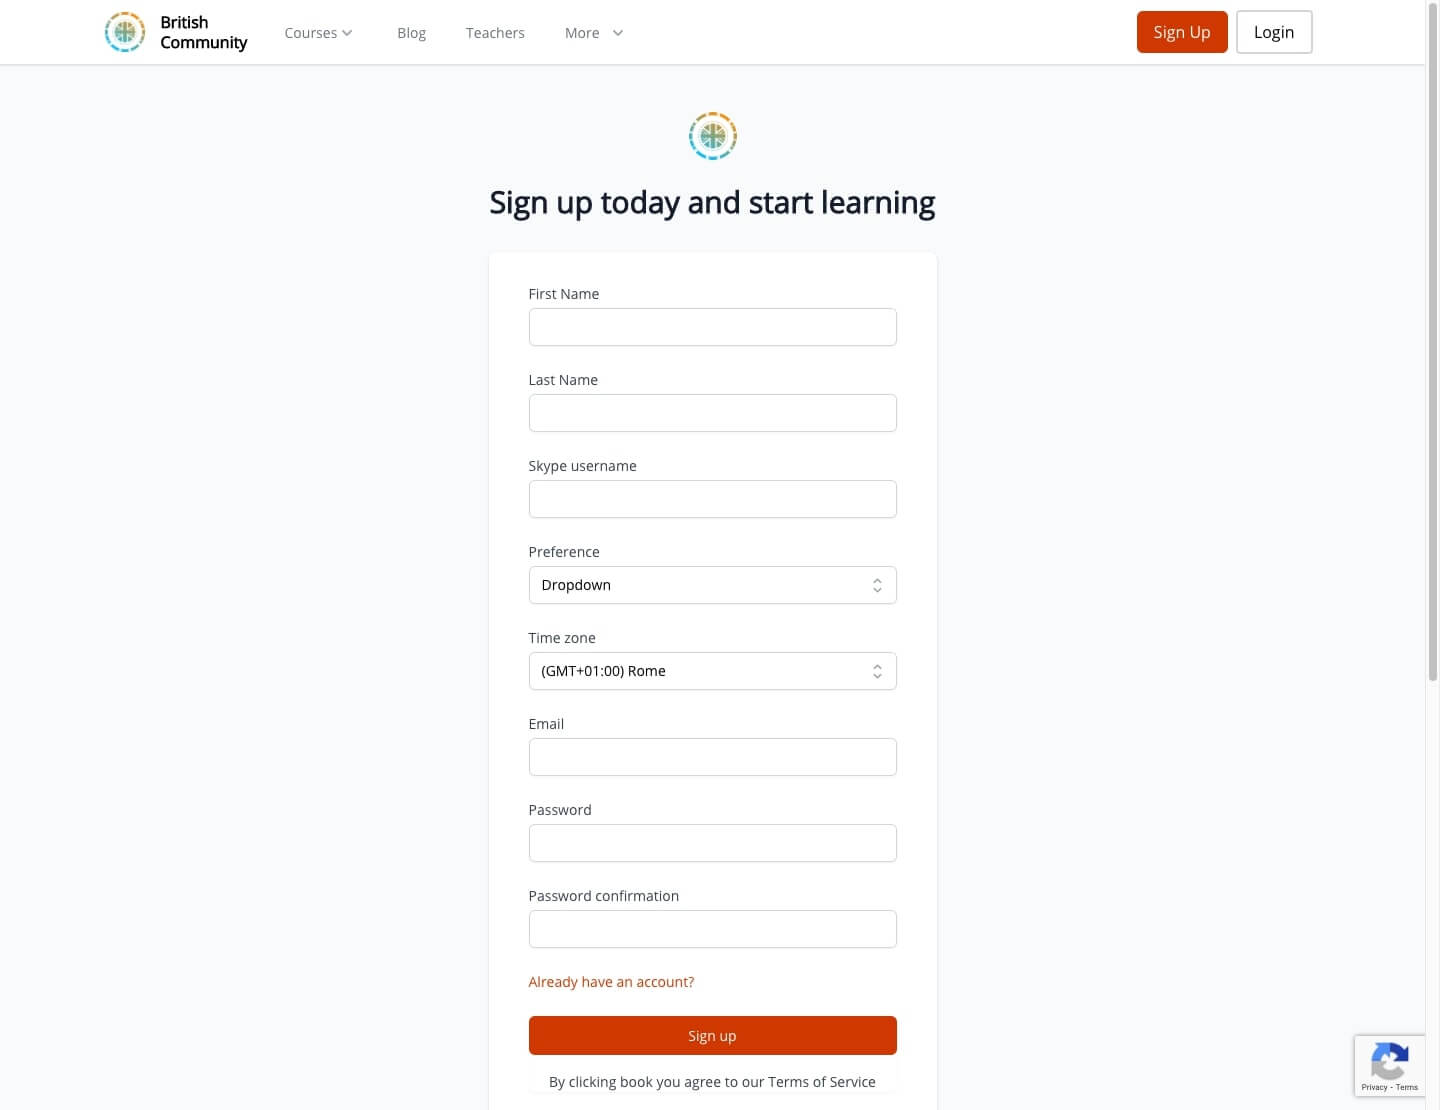 the sign up page